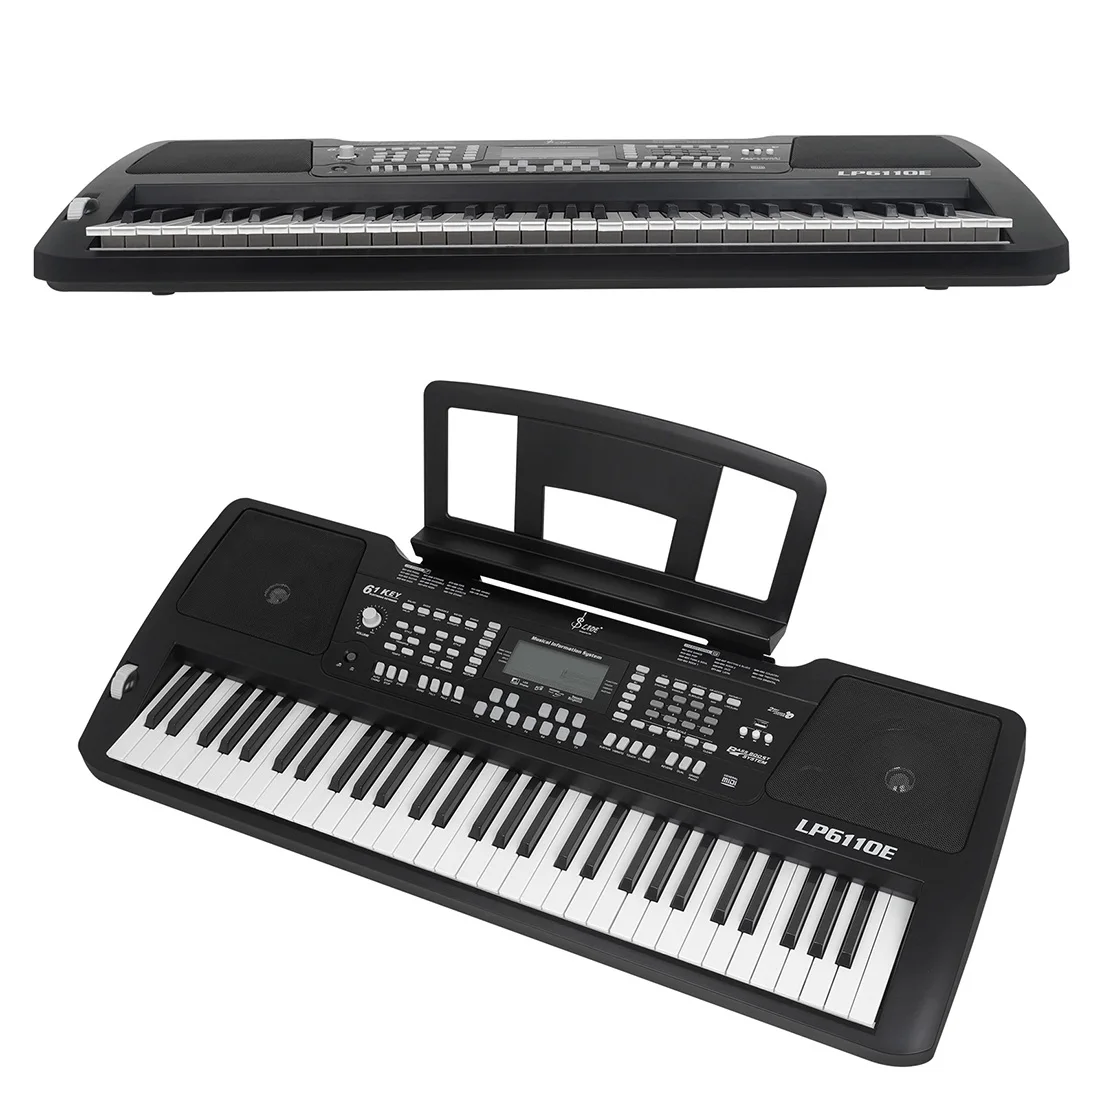 Musical instrument factory Slade hot sell OEM Electronic Organ Piano professional 61 Keys LCD display Electric Piano Keyboard